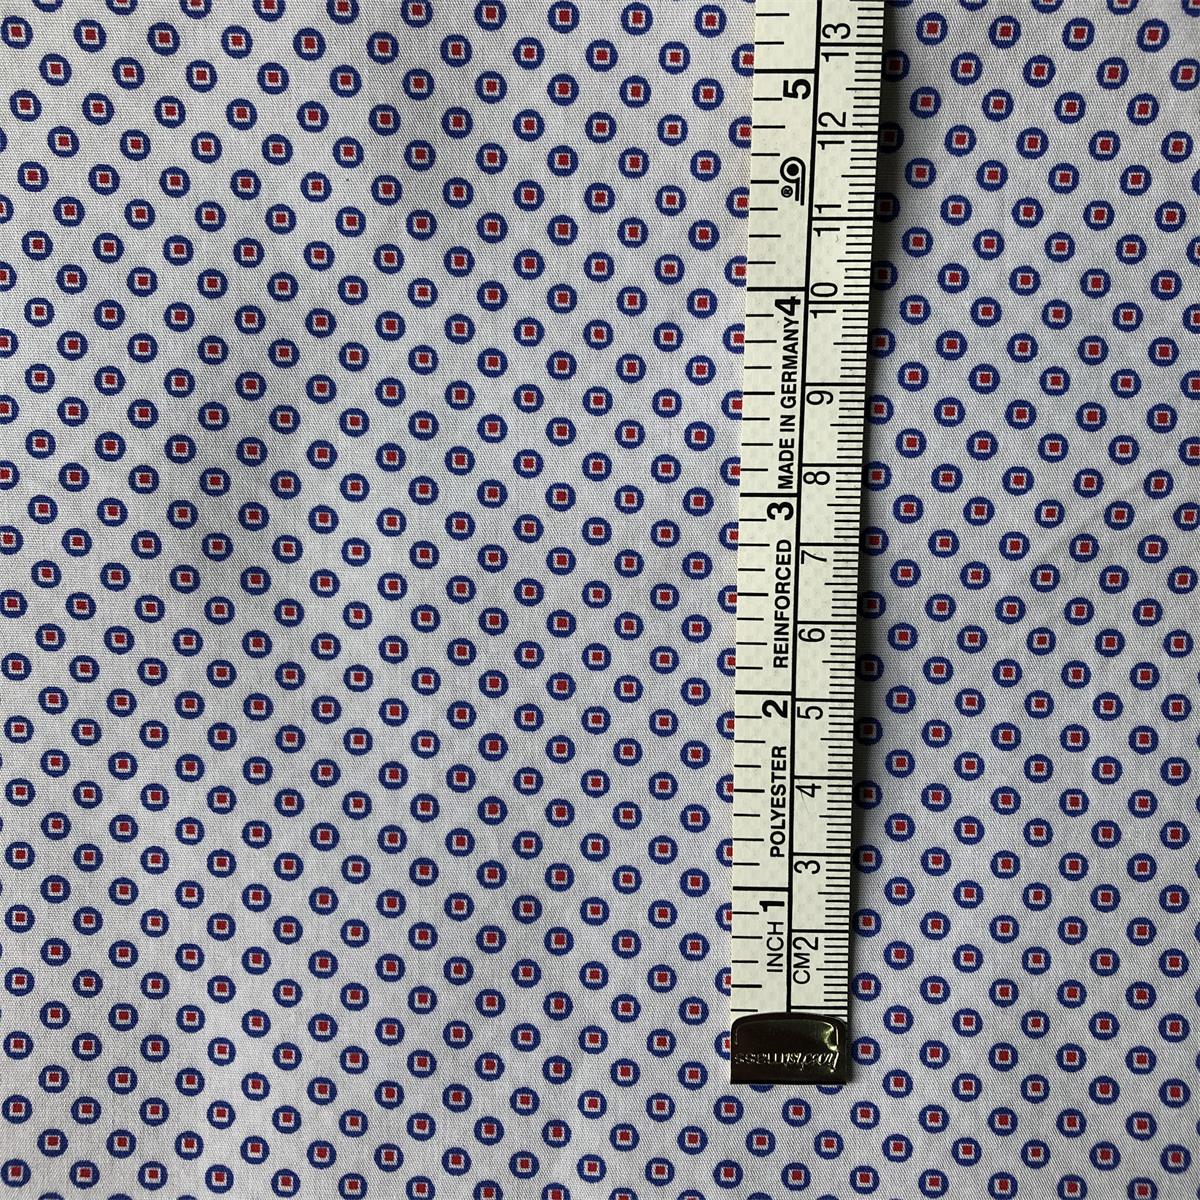 Eco-friendly Textile Cotton Printed fabric for mens shirts 100 cotton poplin printed shirts woven fabric soft comfortable